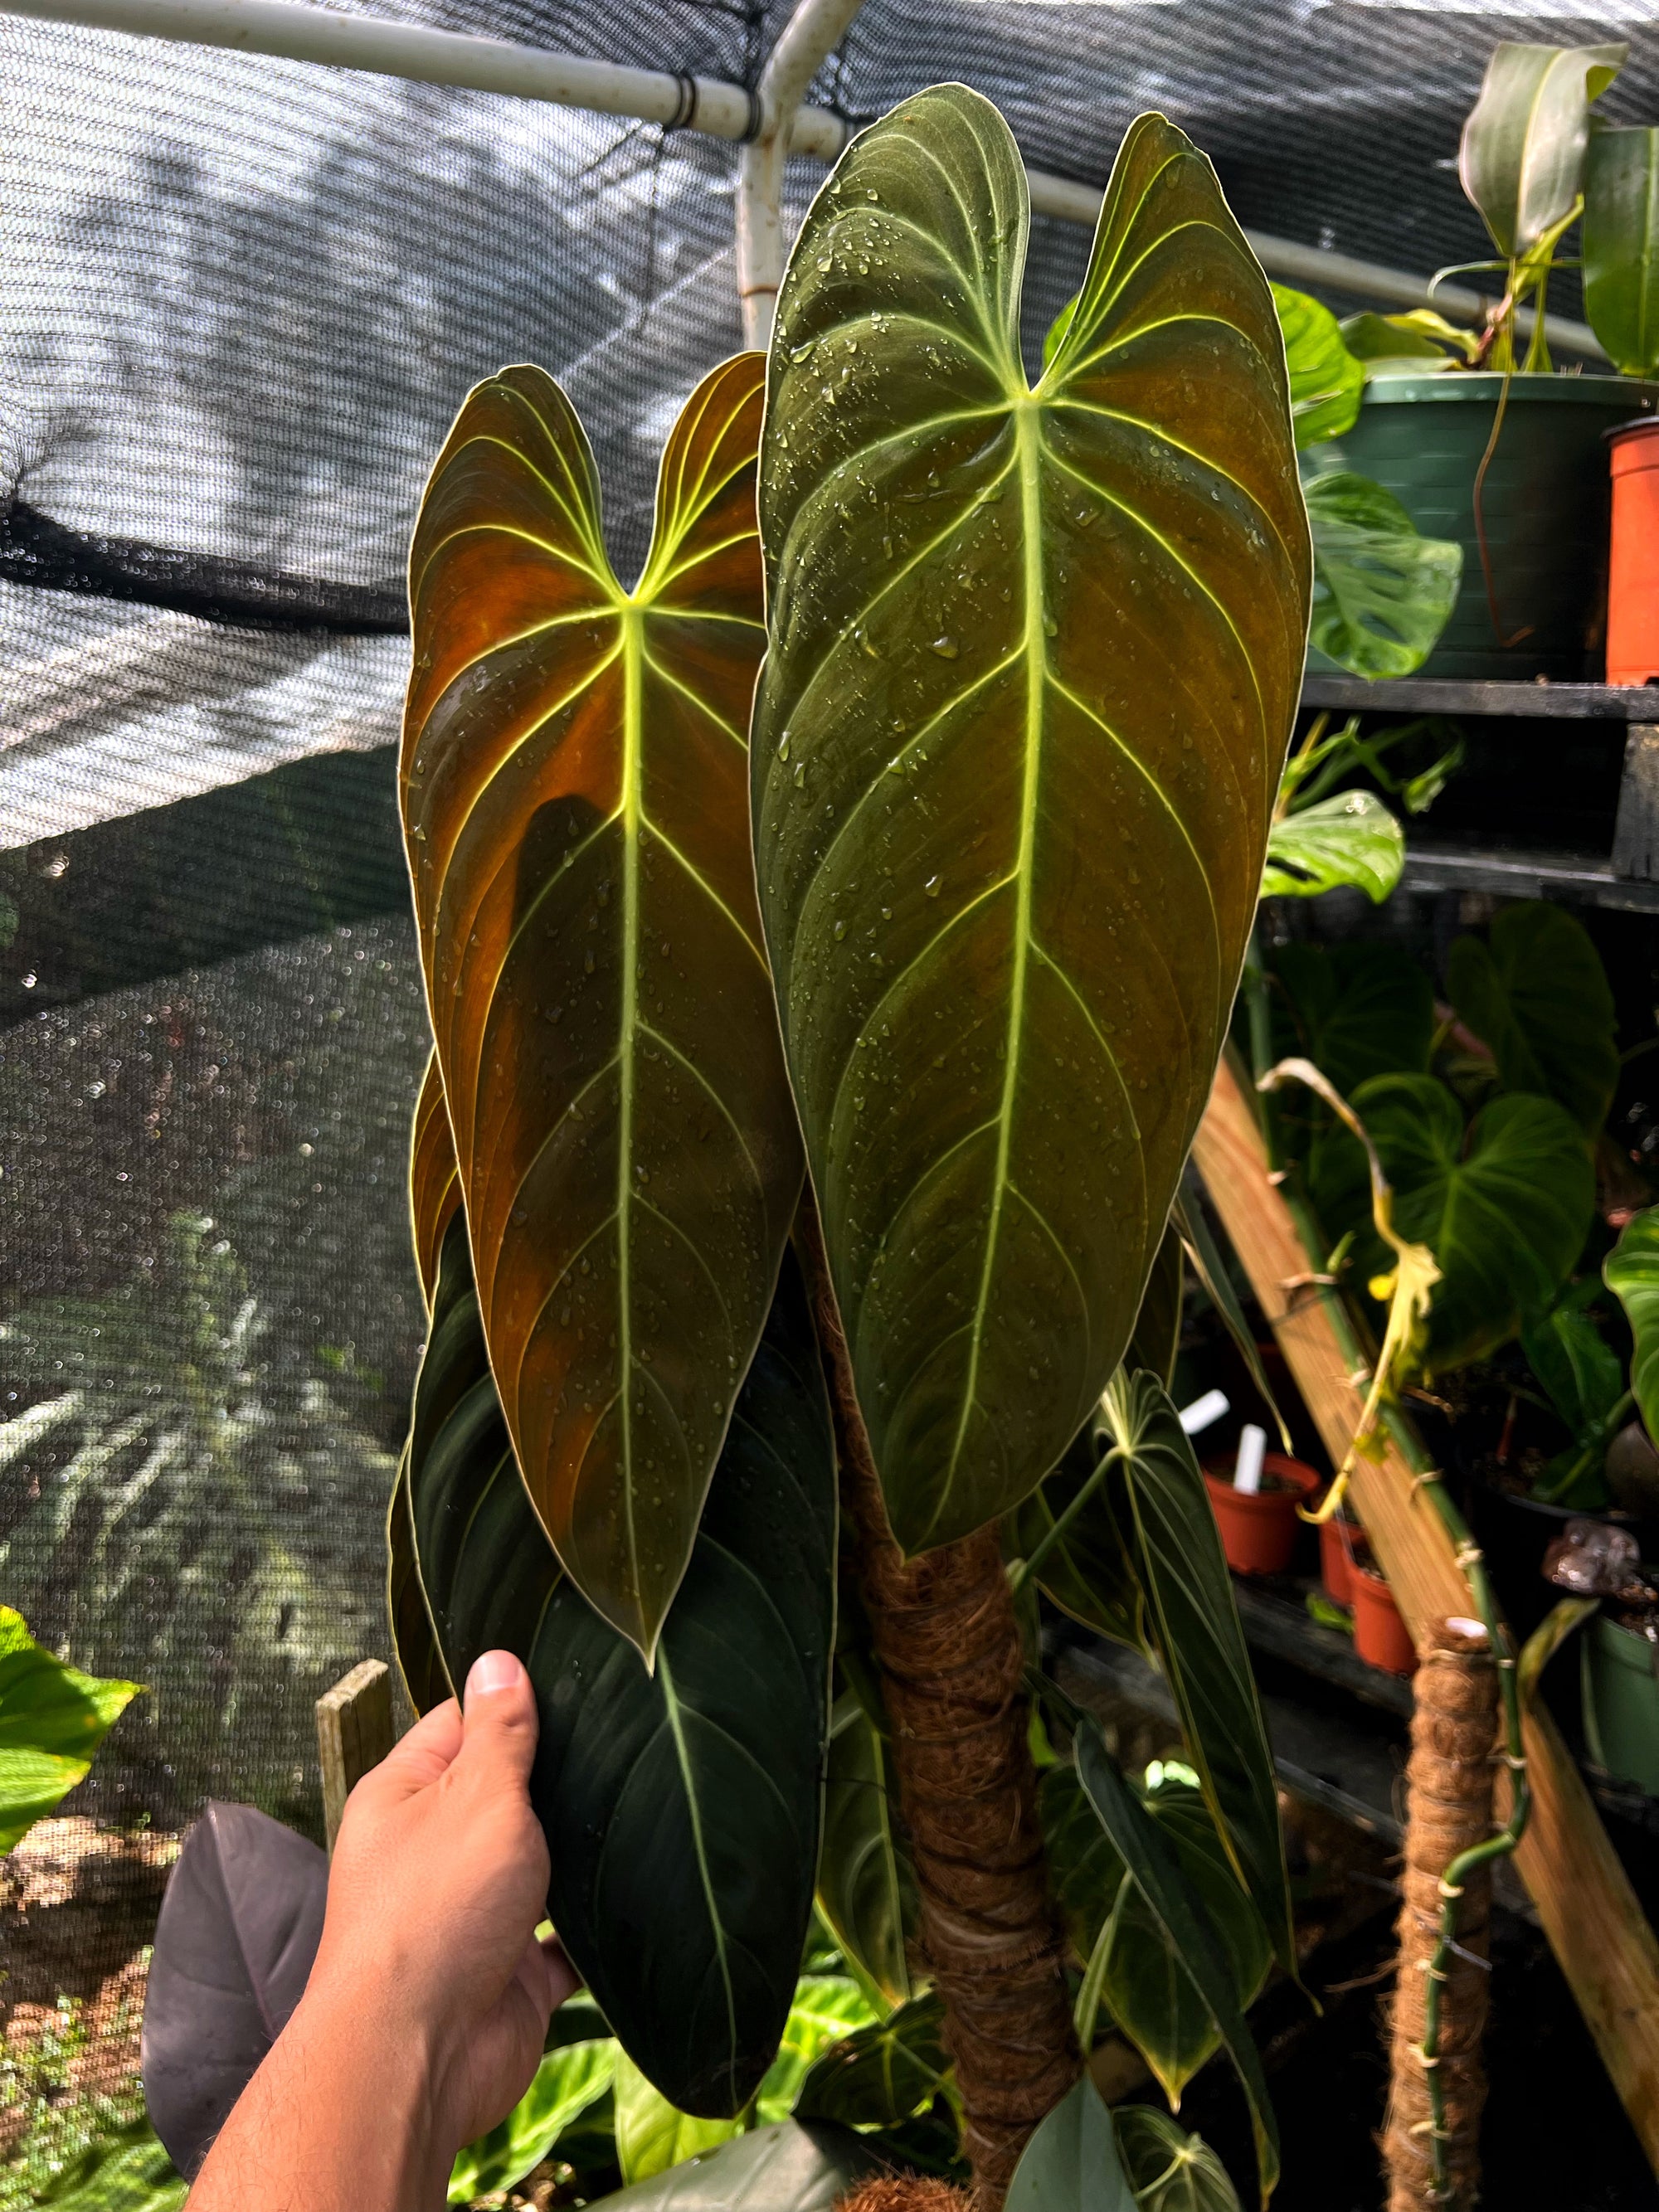 Philodendron Care Guide